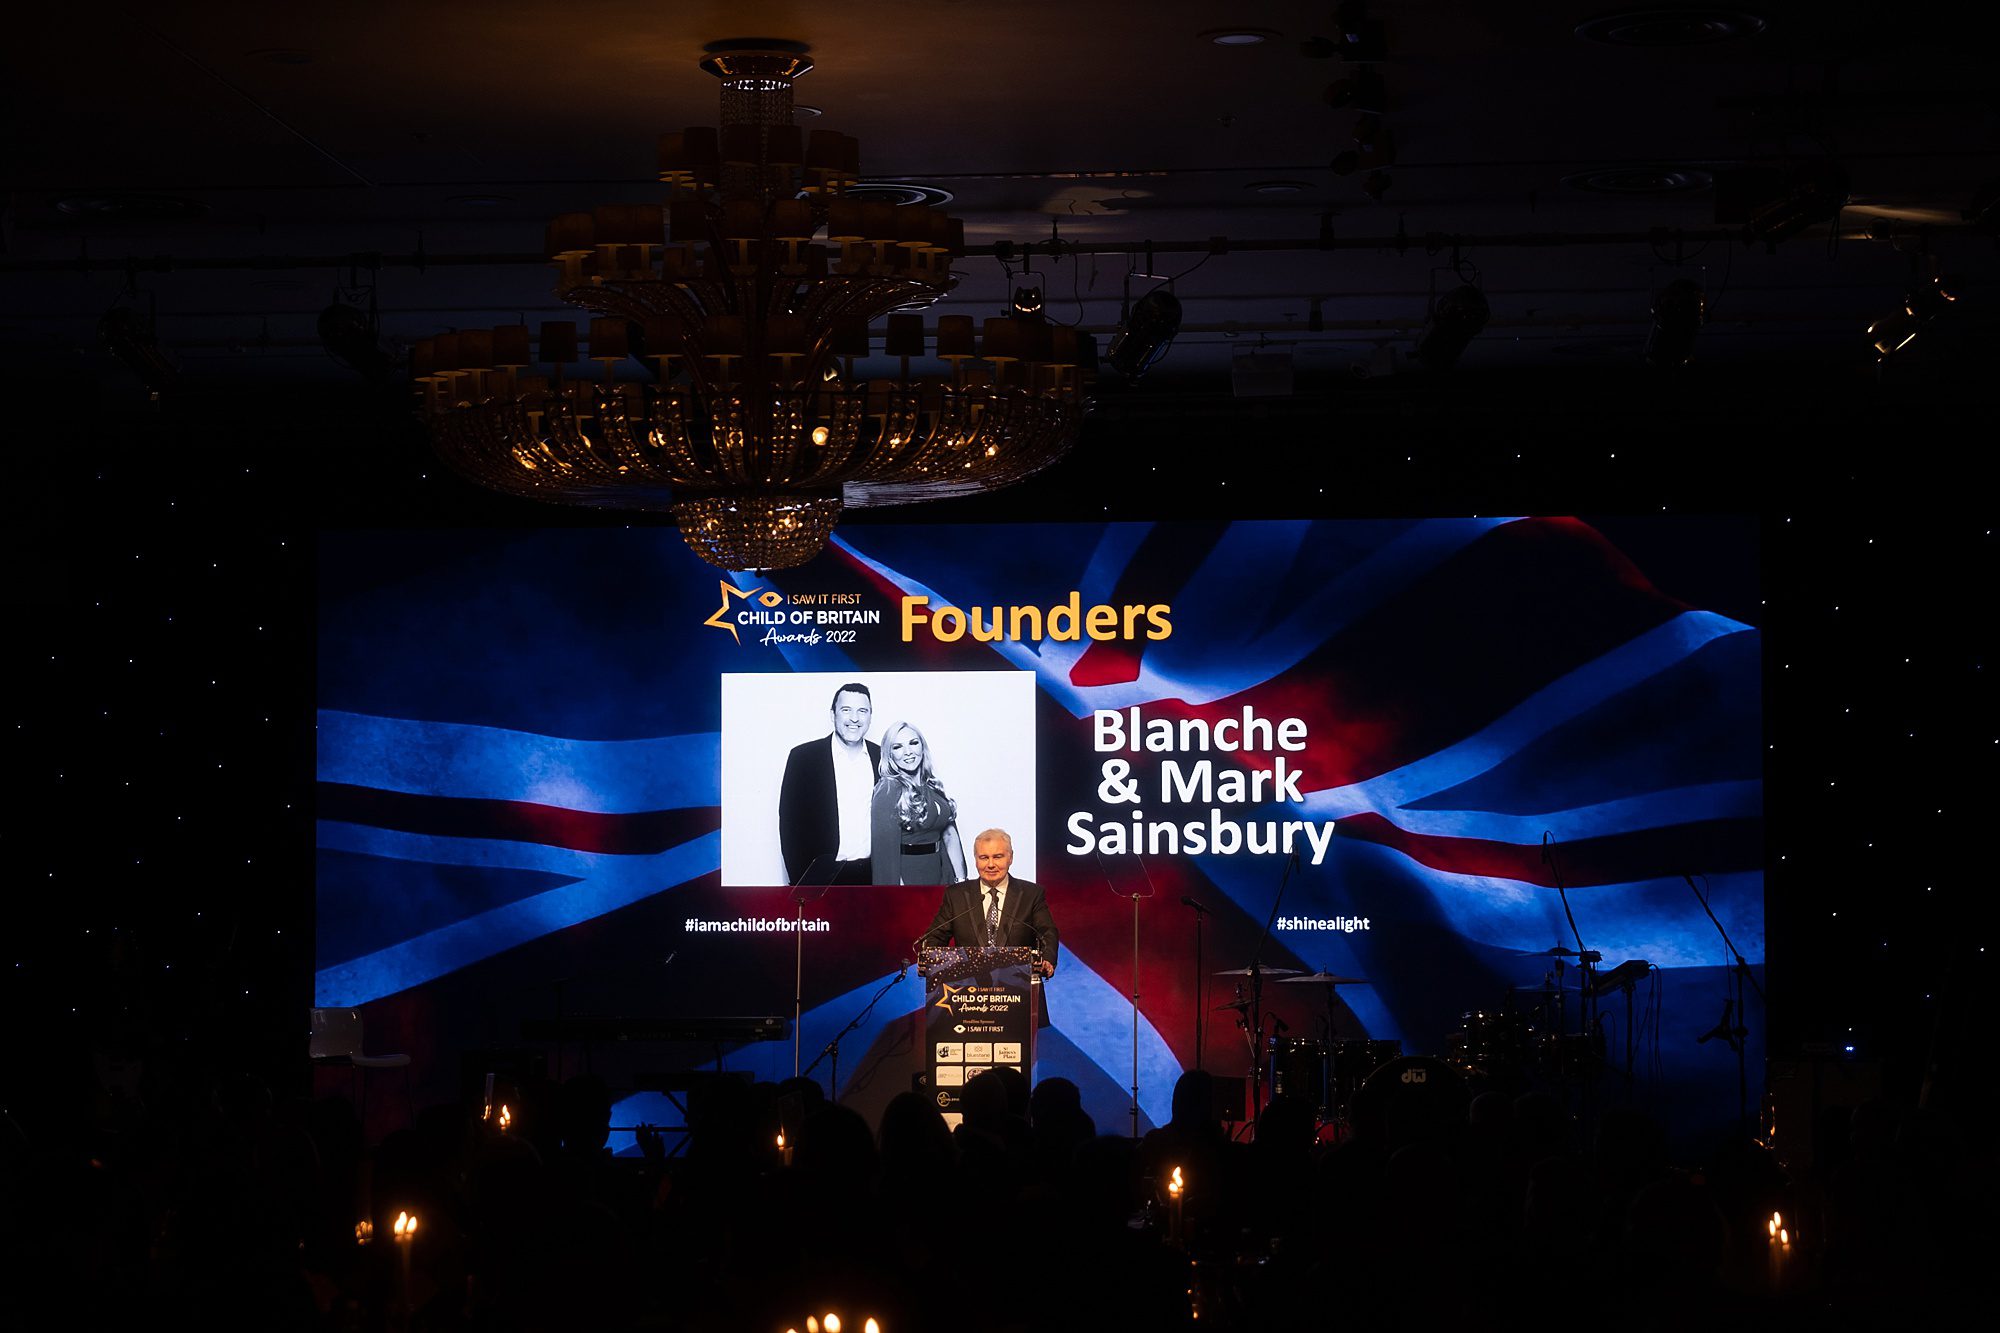 Child of Britain Awards Funders